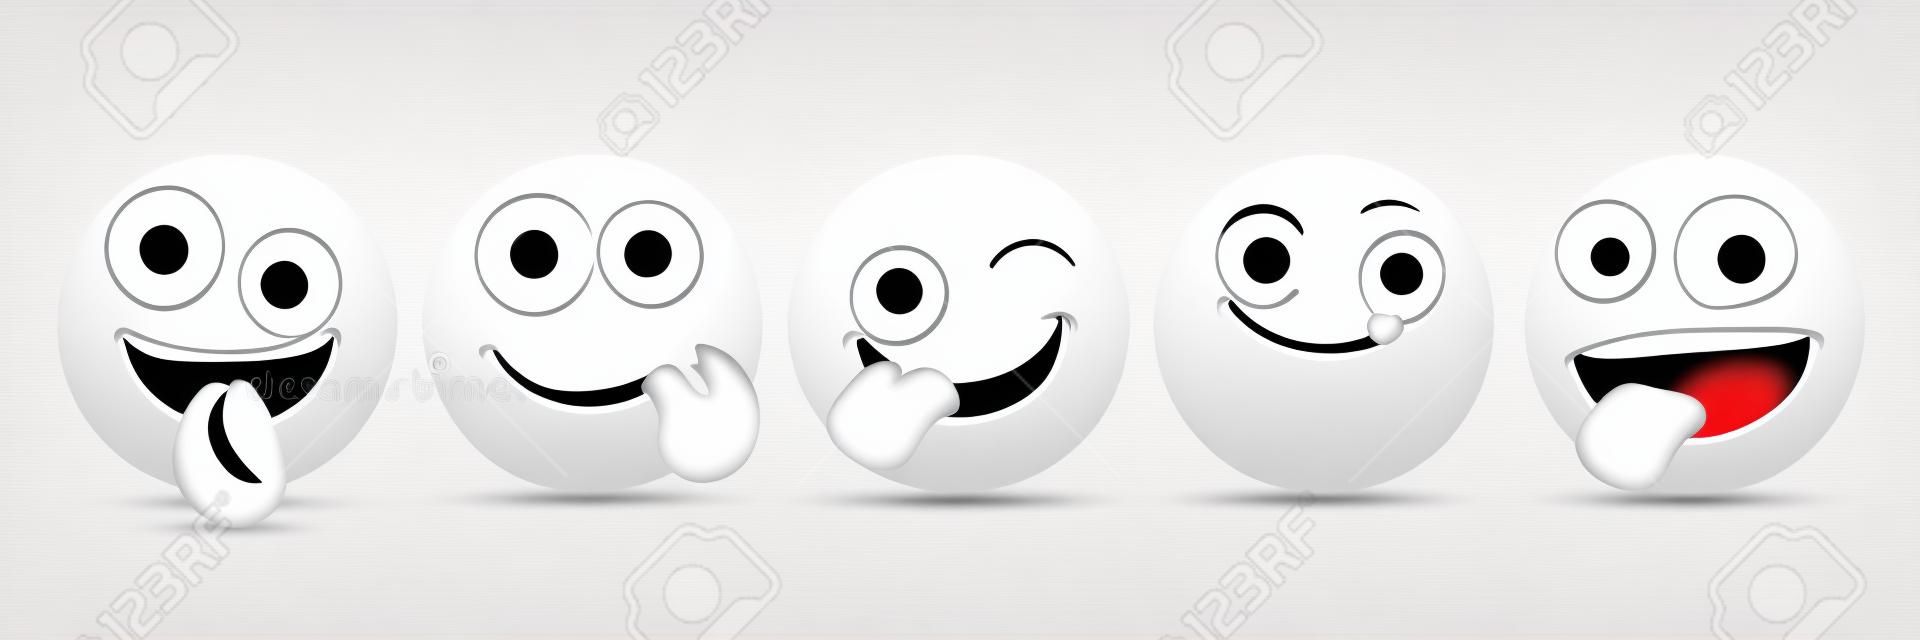 Smileys naughty icon vector set. Smiley face and emoji with happy, licking and hungry facial expressions isolated in white background. Vector illustration